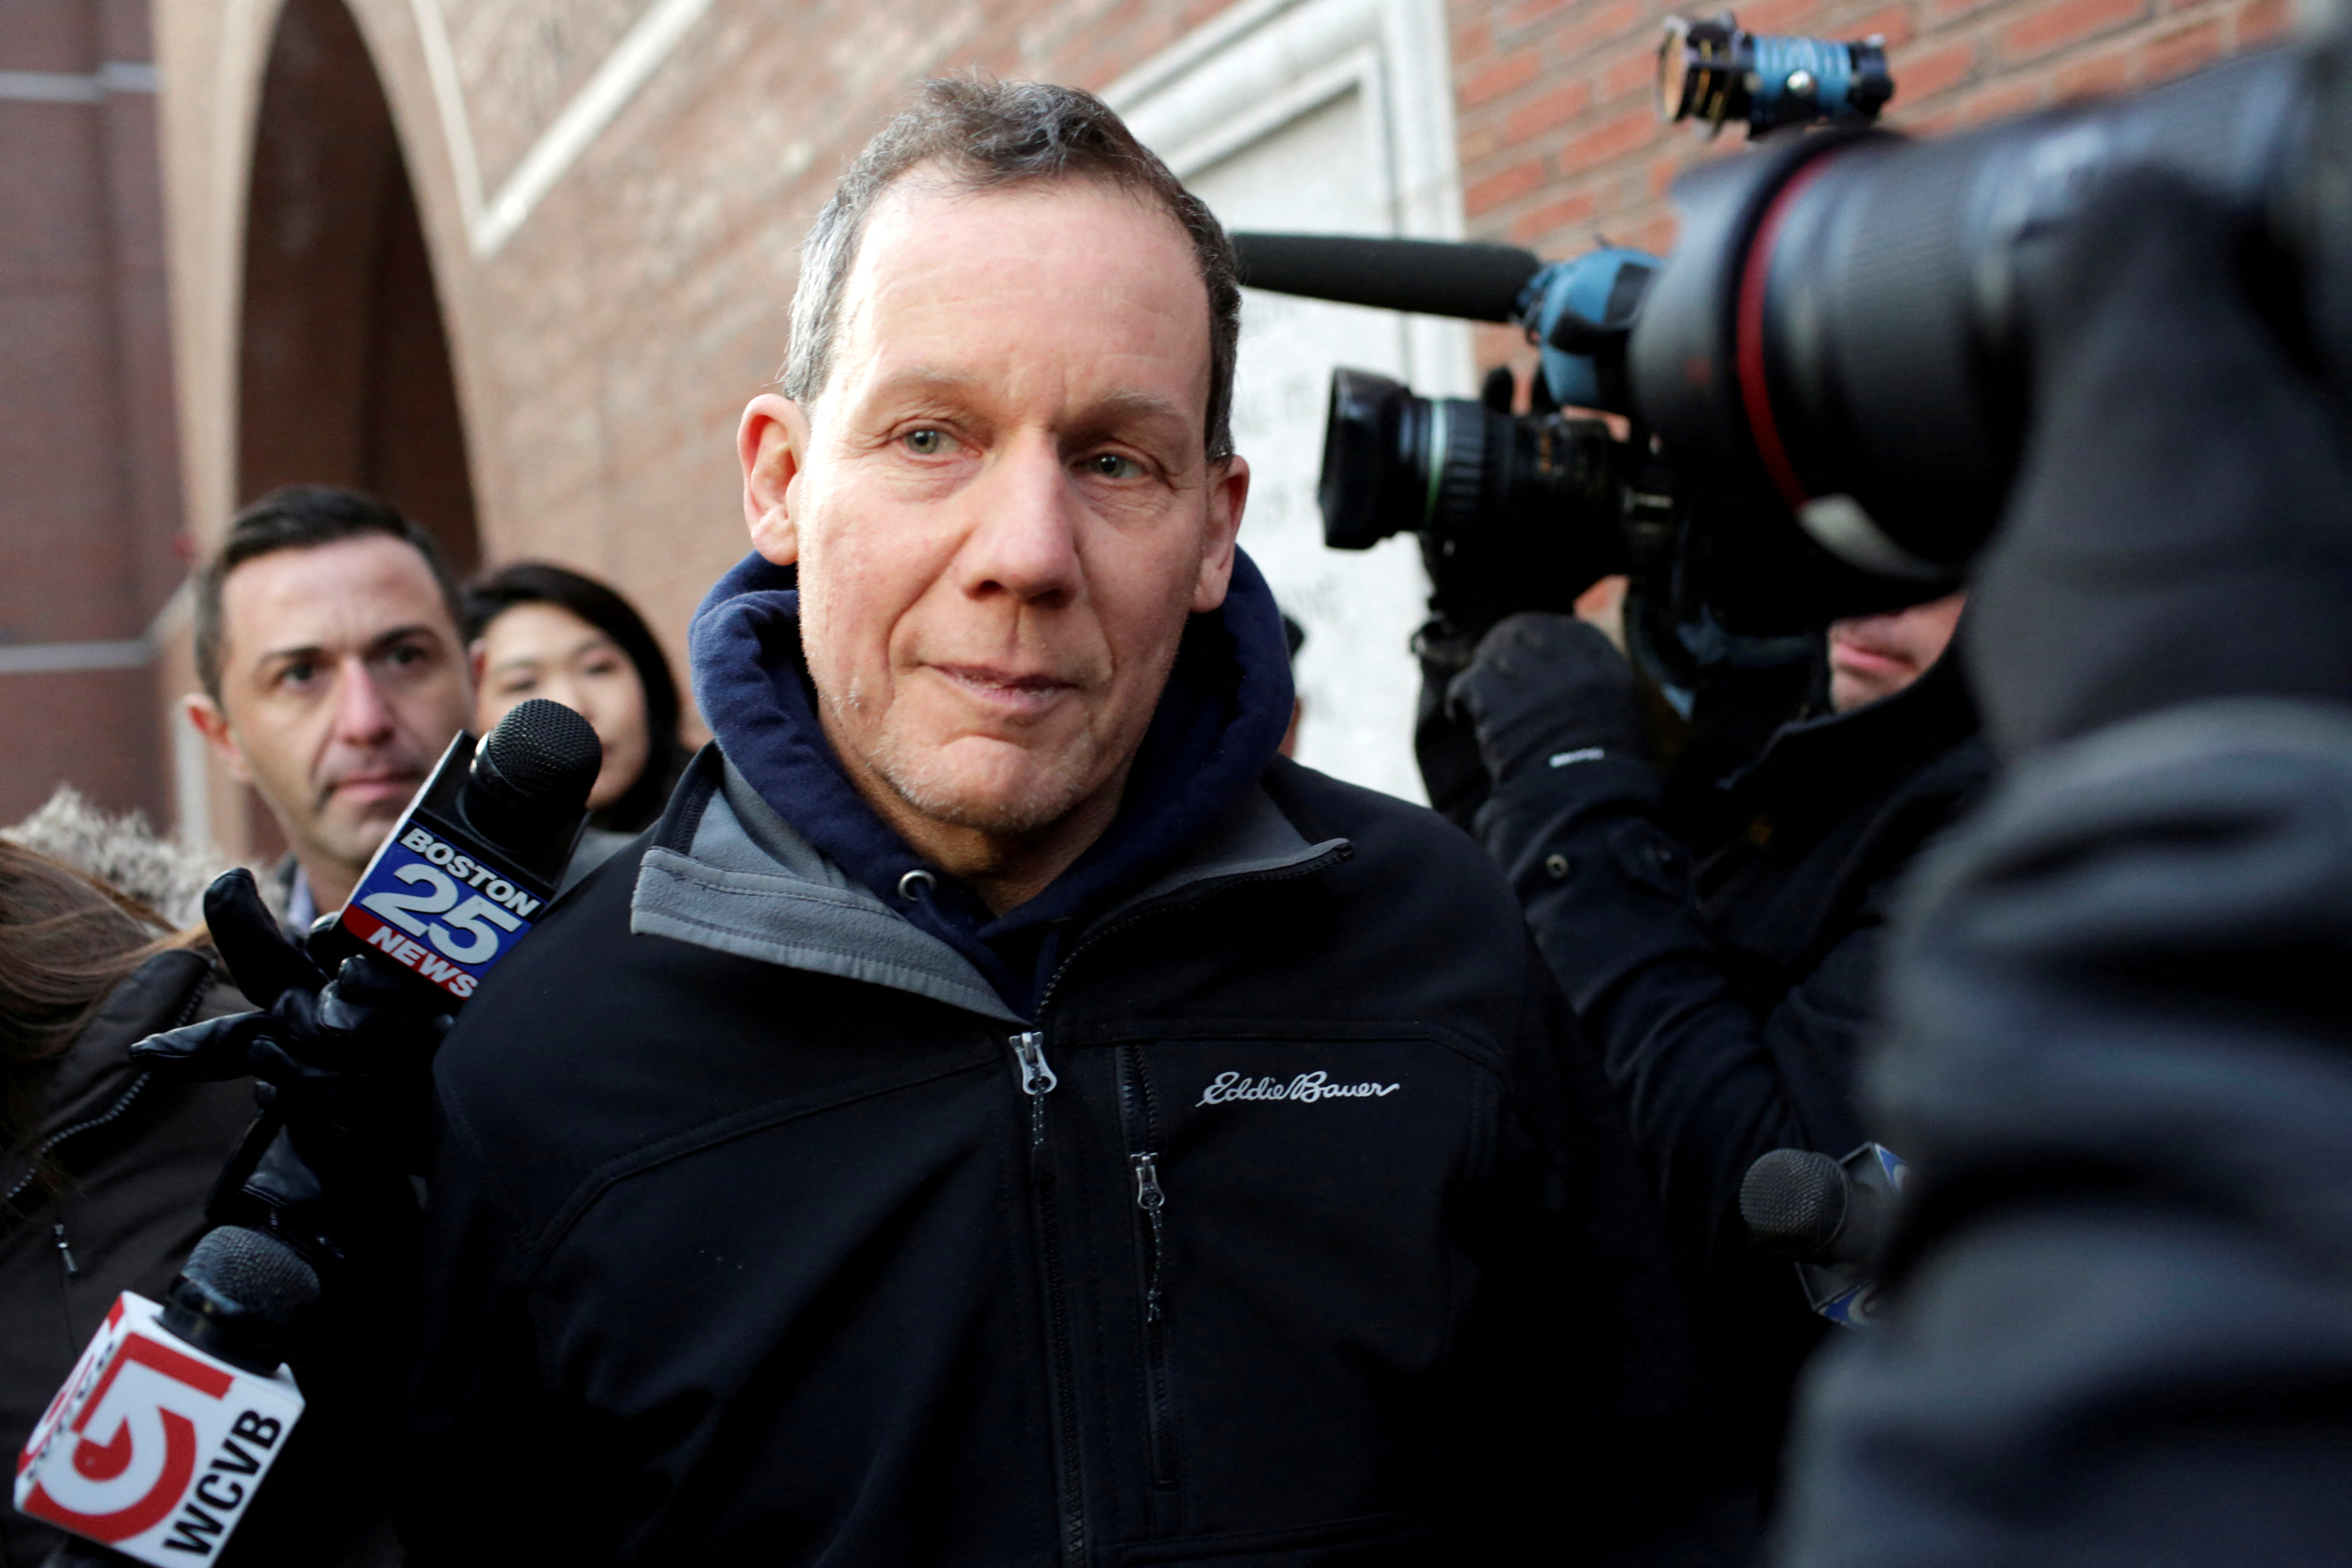 Lieber leaves federal court after being charged in Boston